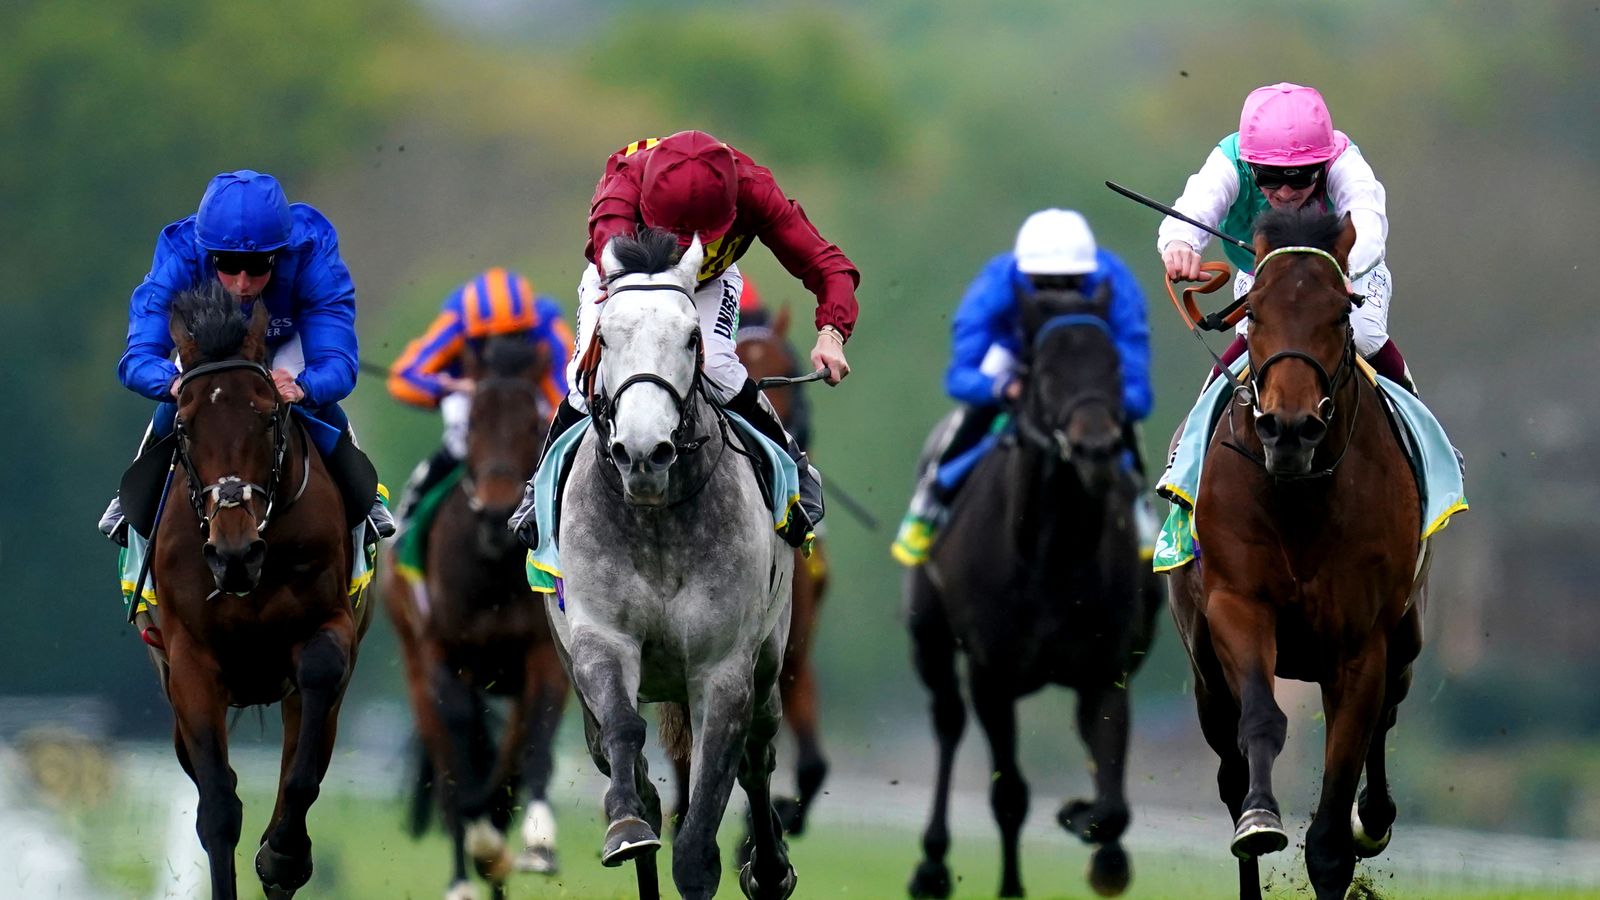 Qipco British Champions Day: Cash in race to be fit for Ascot targets after early season injury